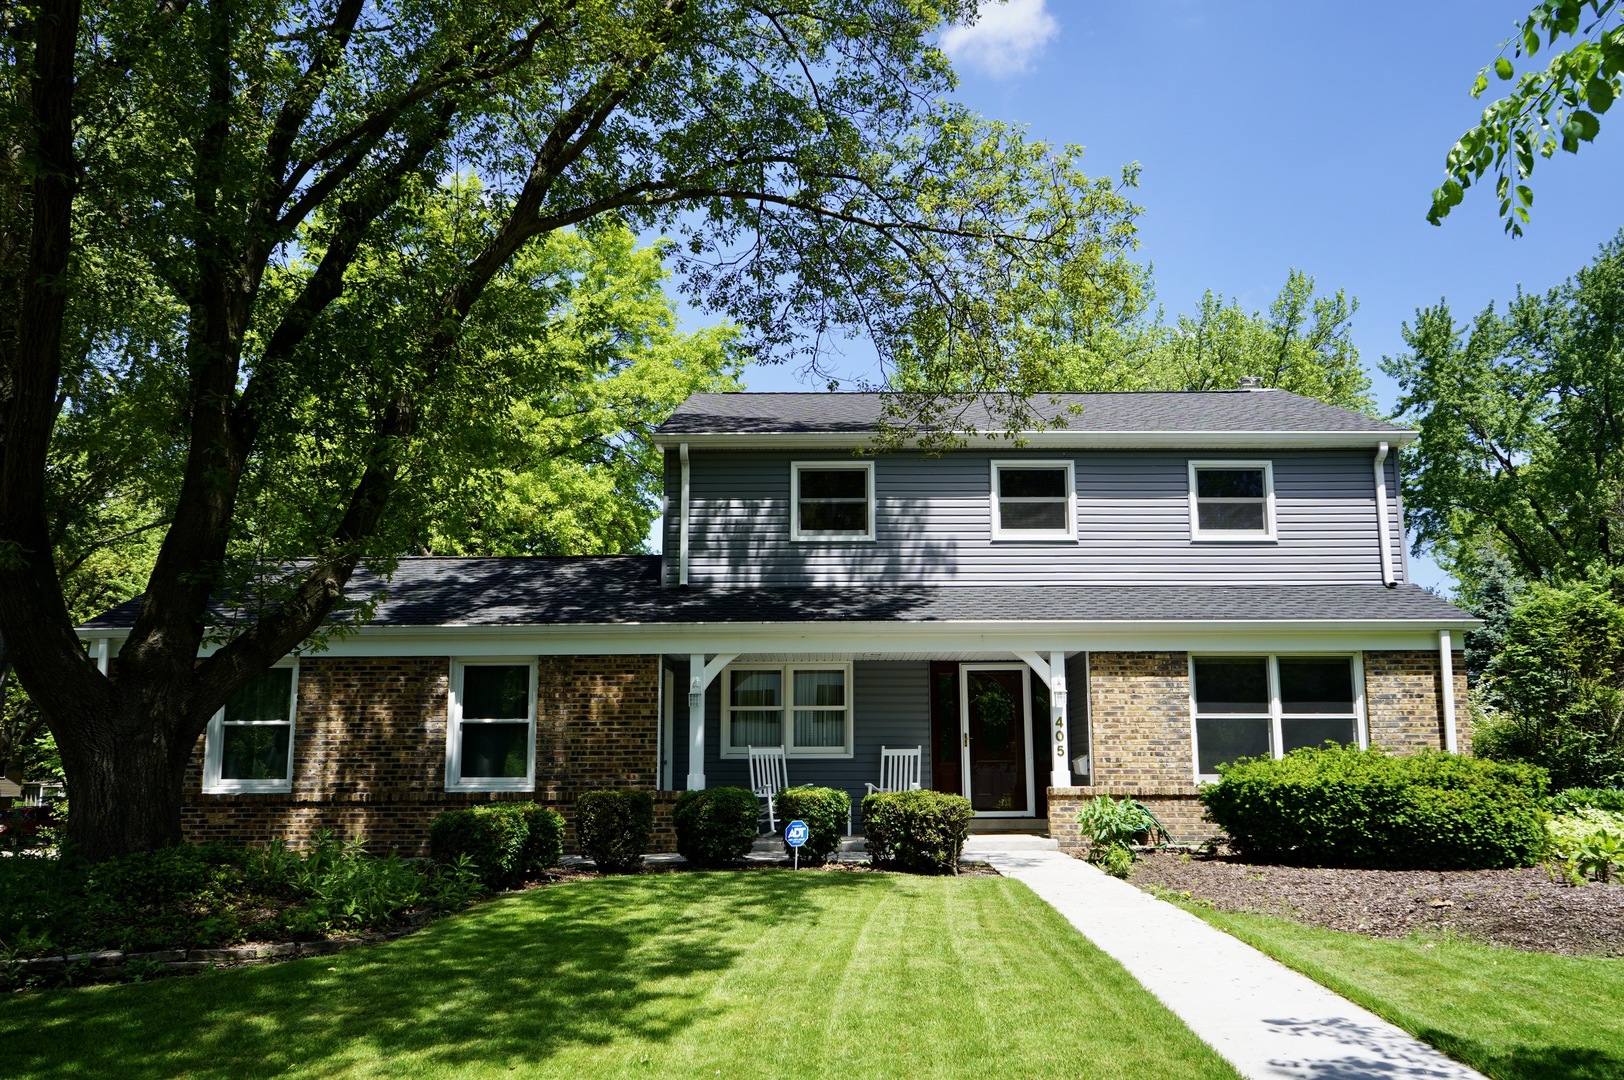 405 BAYBERRY Lane,Naperville,IL-3065-0